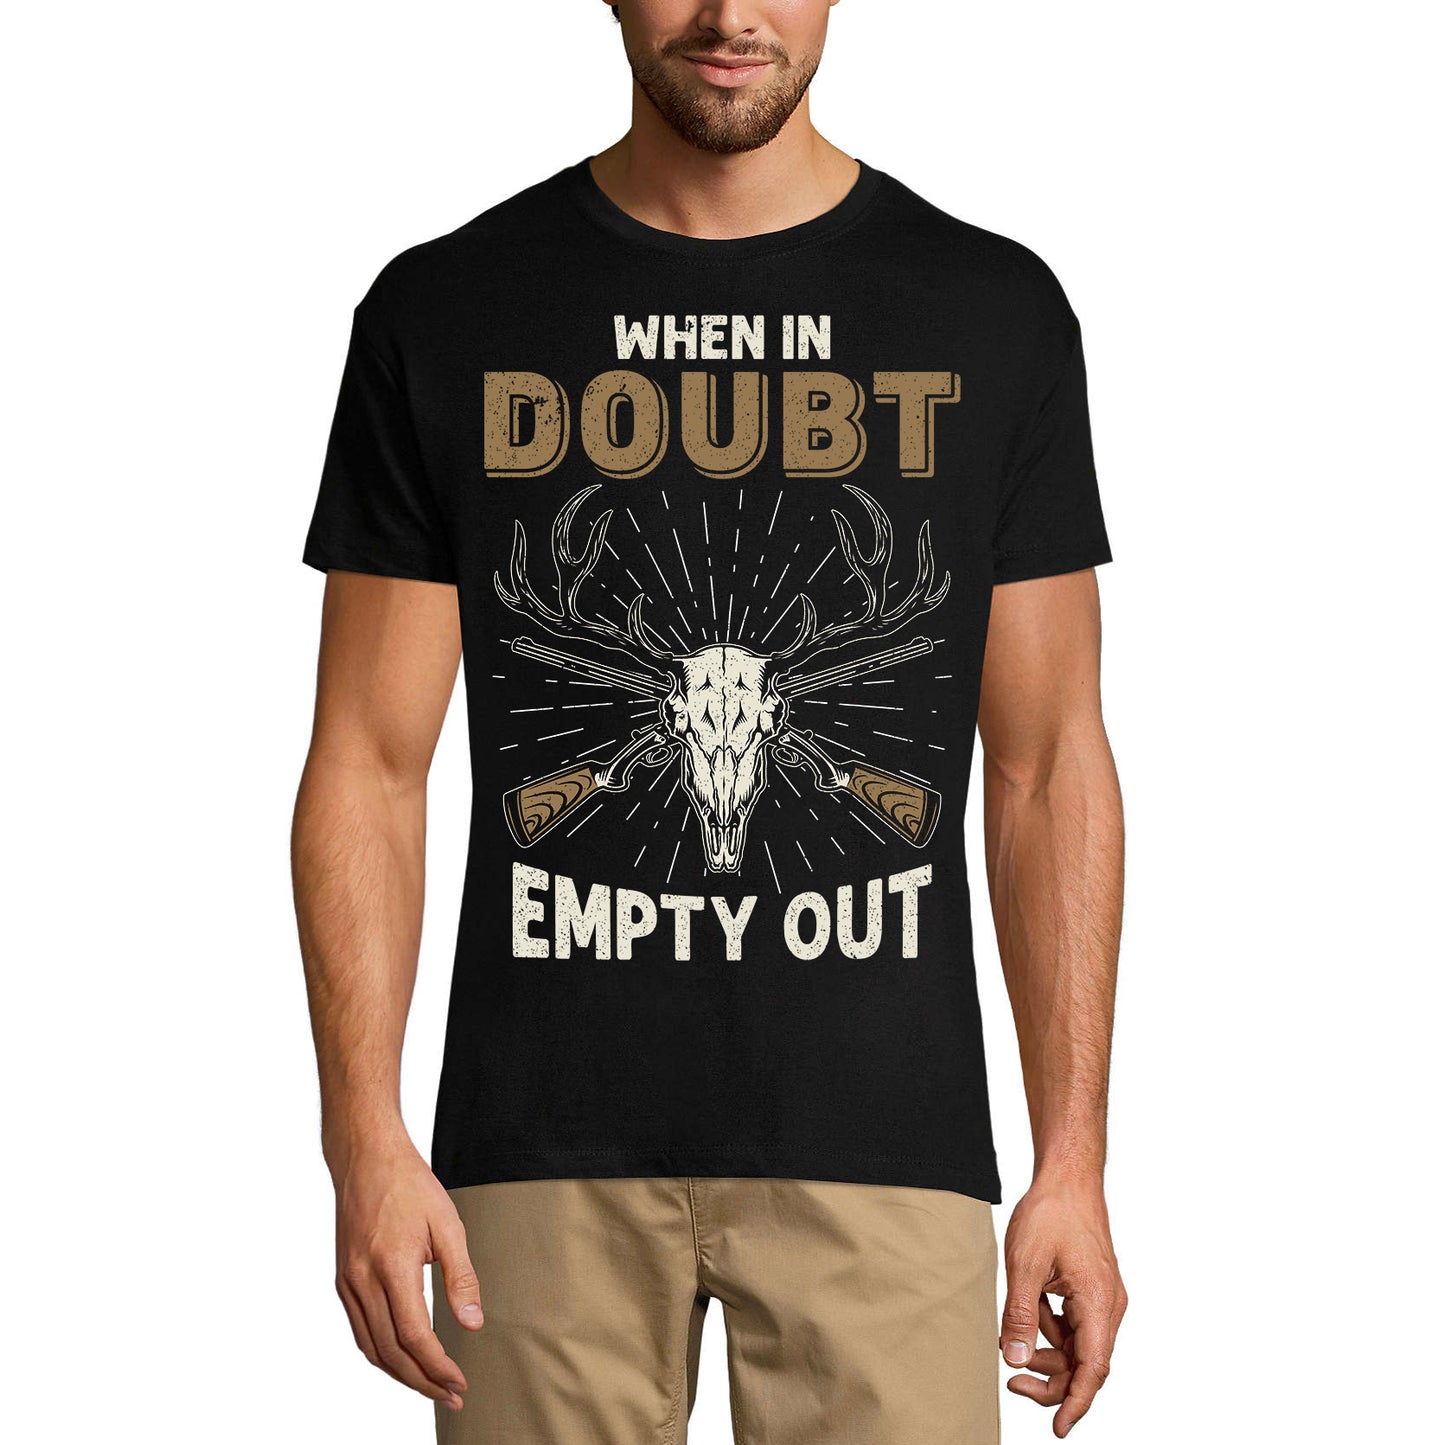 ULTRABASIC Graphic Men's T-Shirt When In Doubt Empty Out - Deer Hunting Tee Shirt